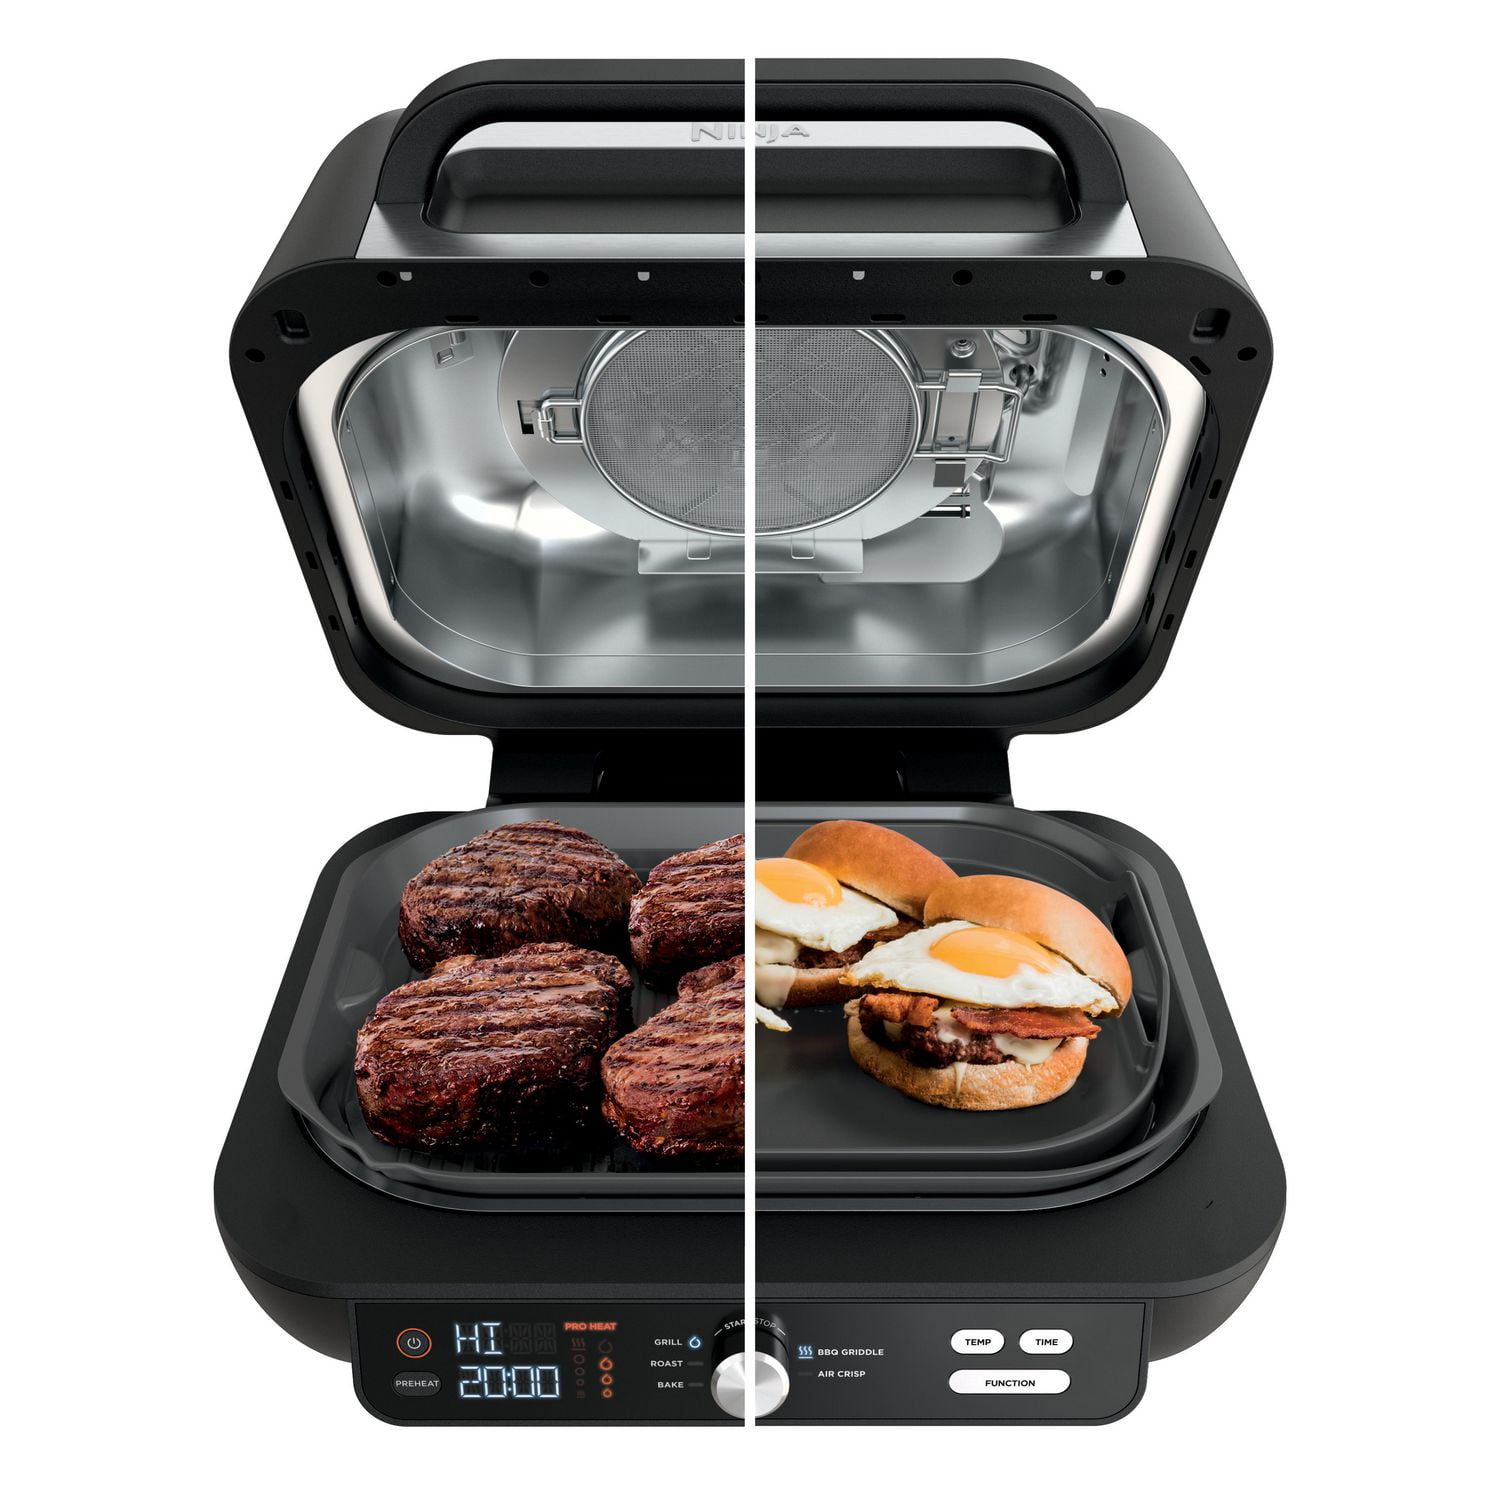 Ninja IG600C Foodi XL Pro 5-in-1 Indoor Grill & Griddle with 4-Quart Air  Fryer, Roast, and Bake 